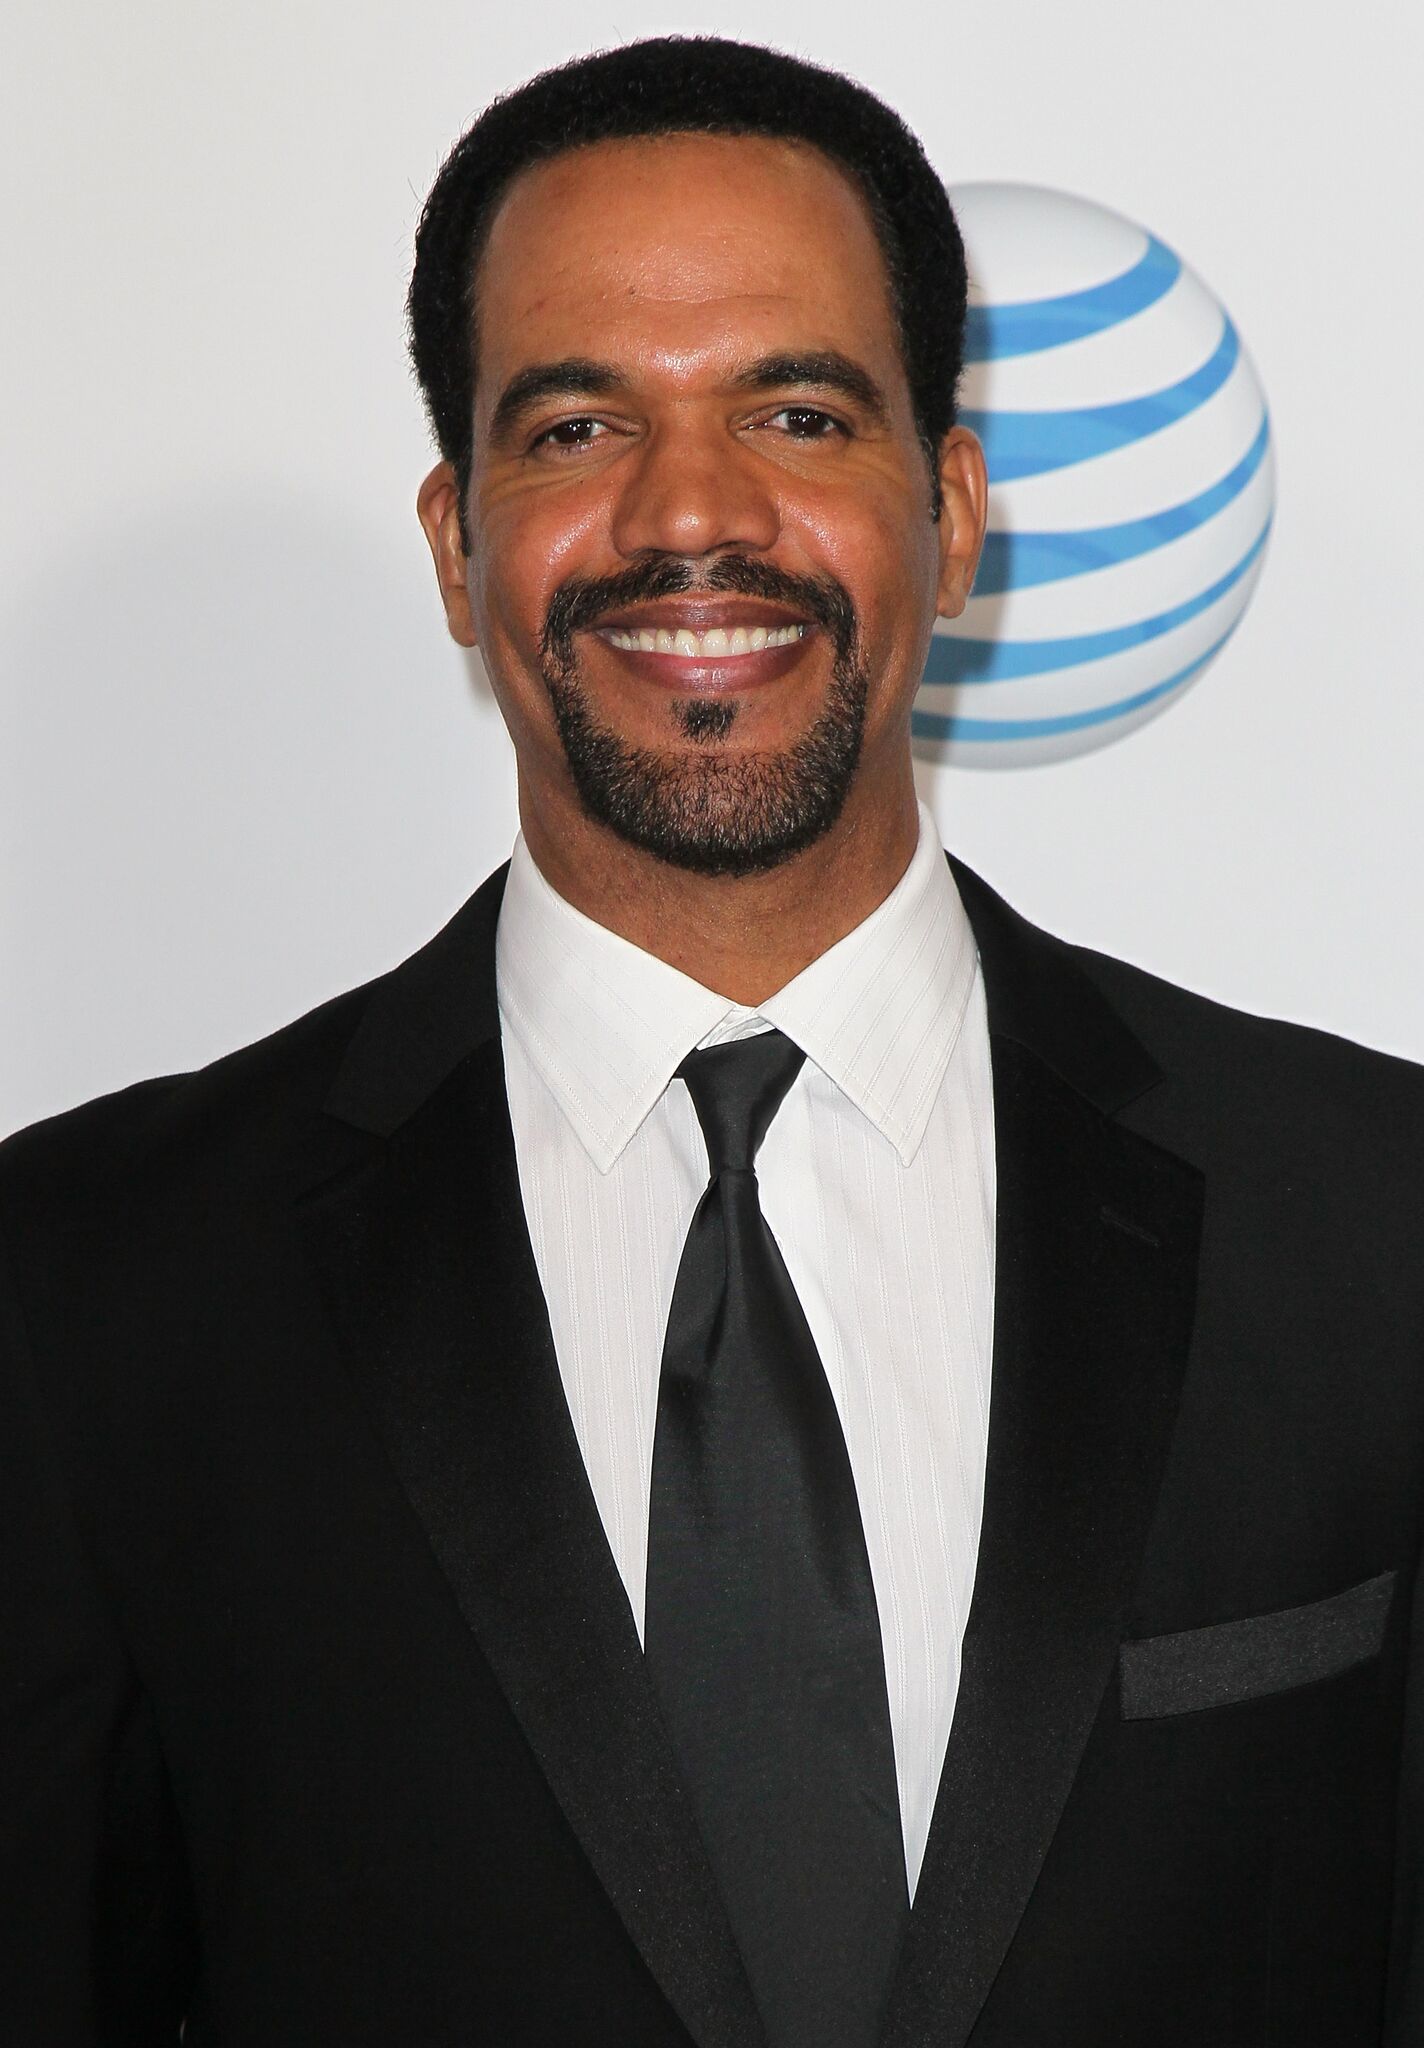 Kristoff St. John poses for picture at red carpet event | Getty Images